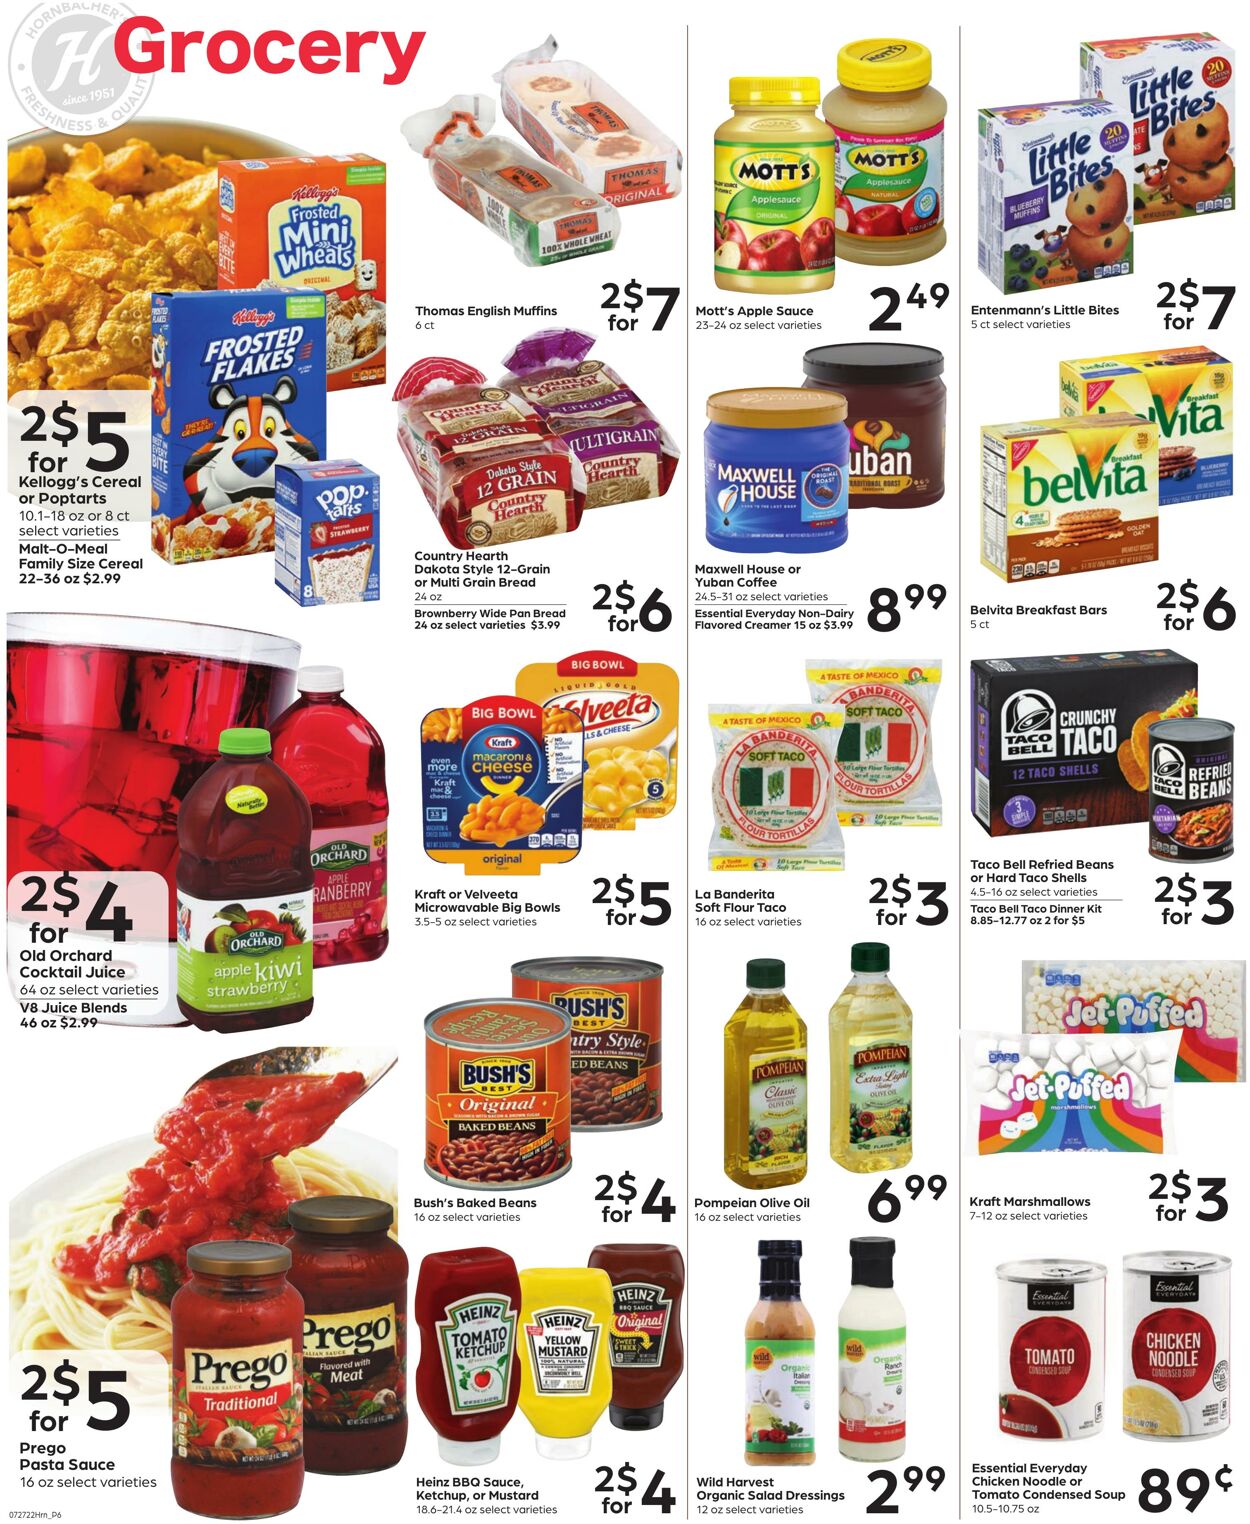 Weekly ad Hornbacher's 07/27/2022 - 08/02/2022